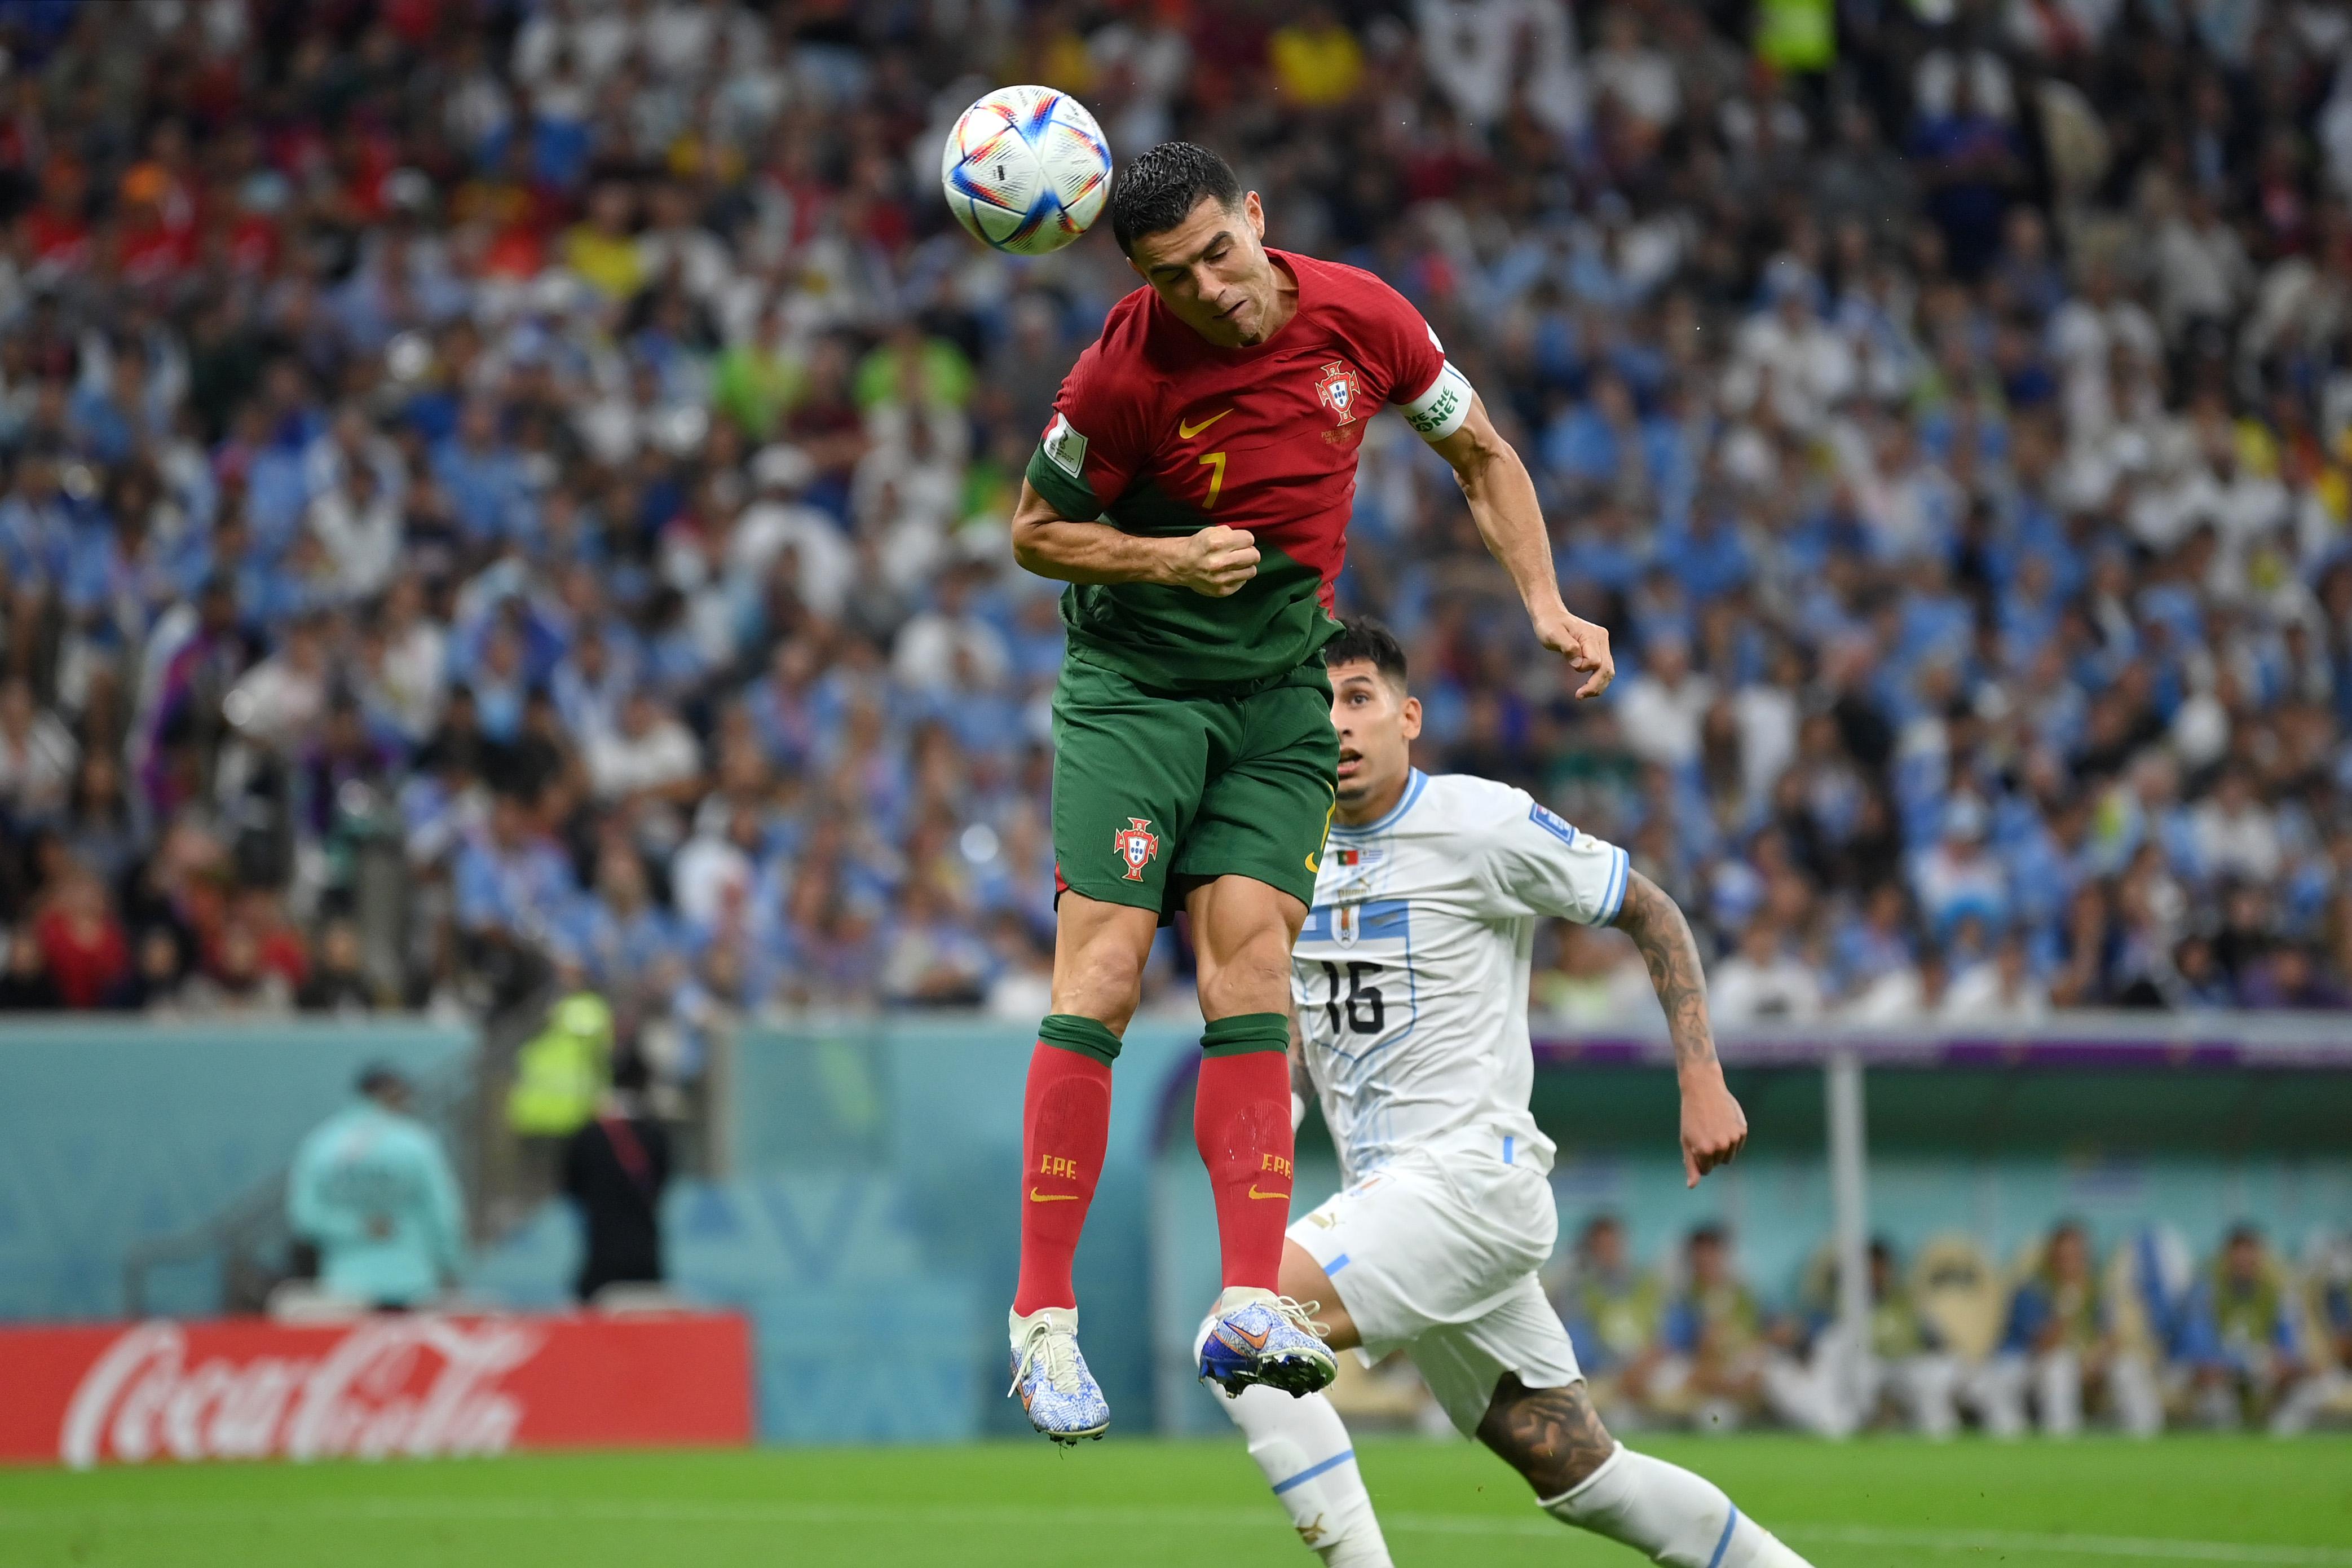 Cristiano Ronaldo of Portugal on the World Cup field as he attempts to head the ball. He has jumped in the air, and the ball almost touches his head. Behind him is one of Uruguay's players.